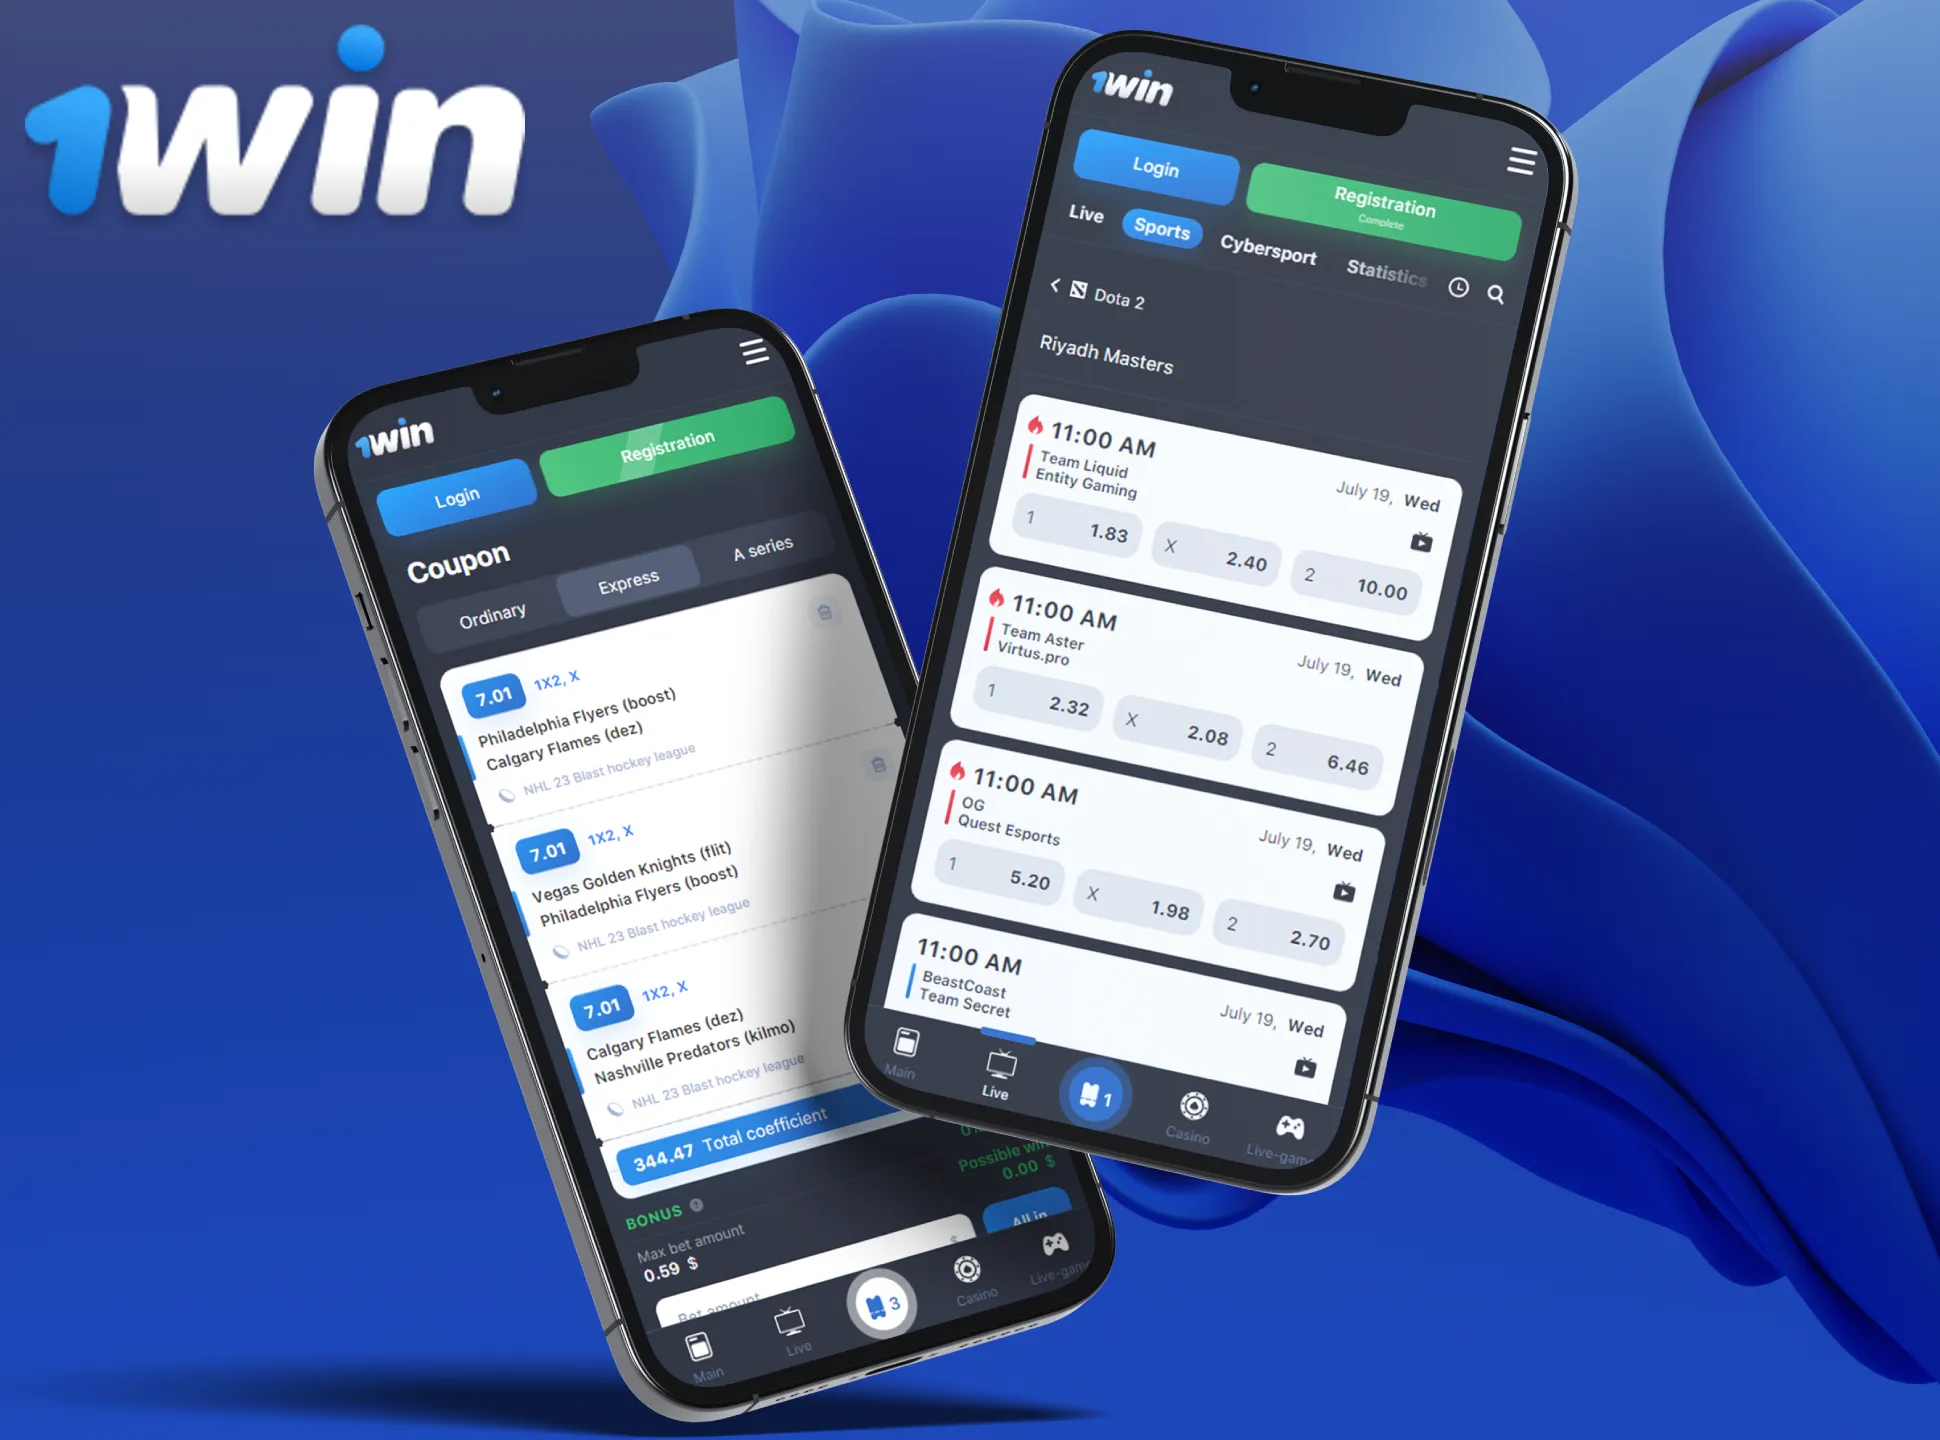 You can use the 1win mobile version without downloading any software.